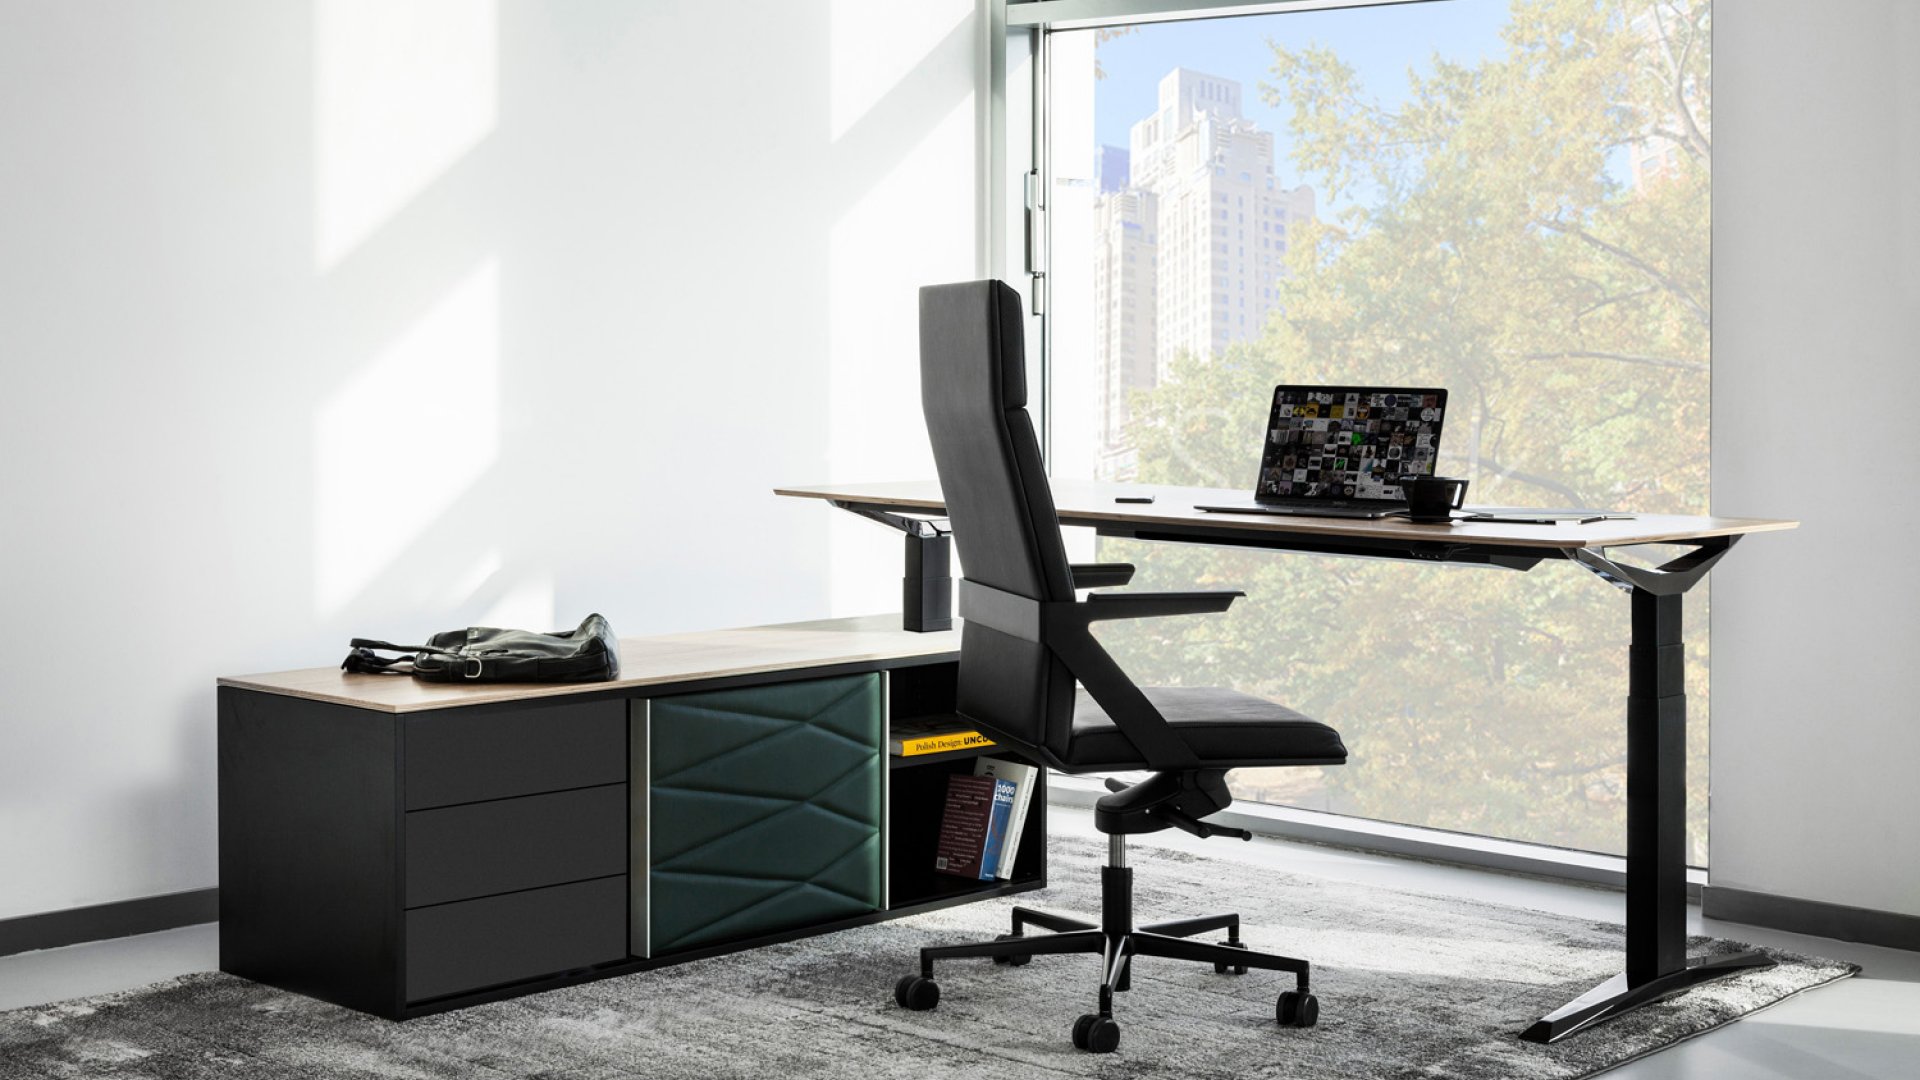 FIL office chairs